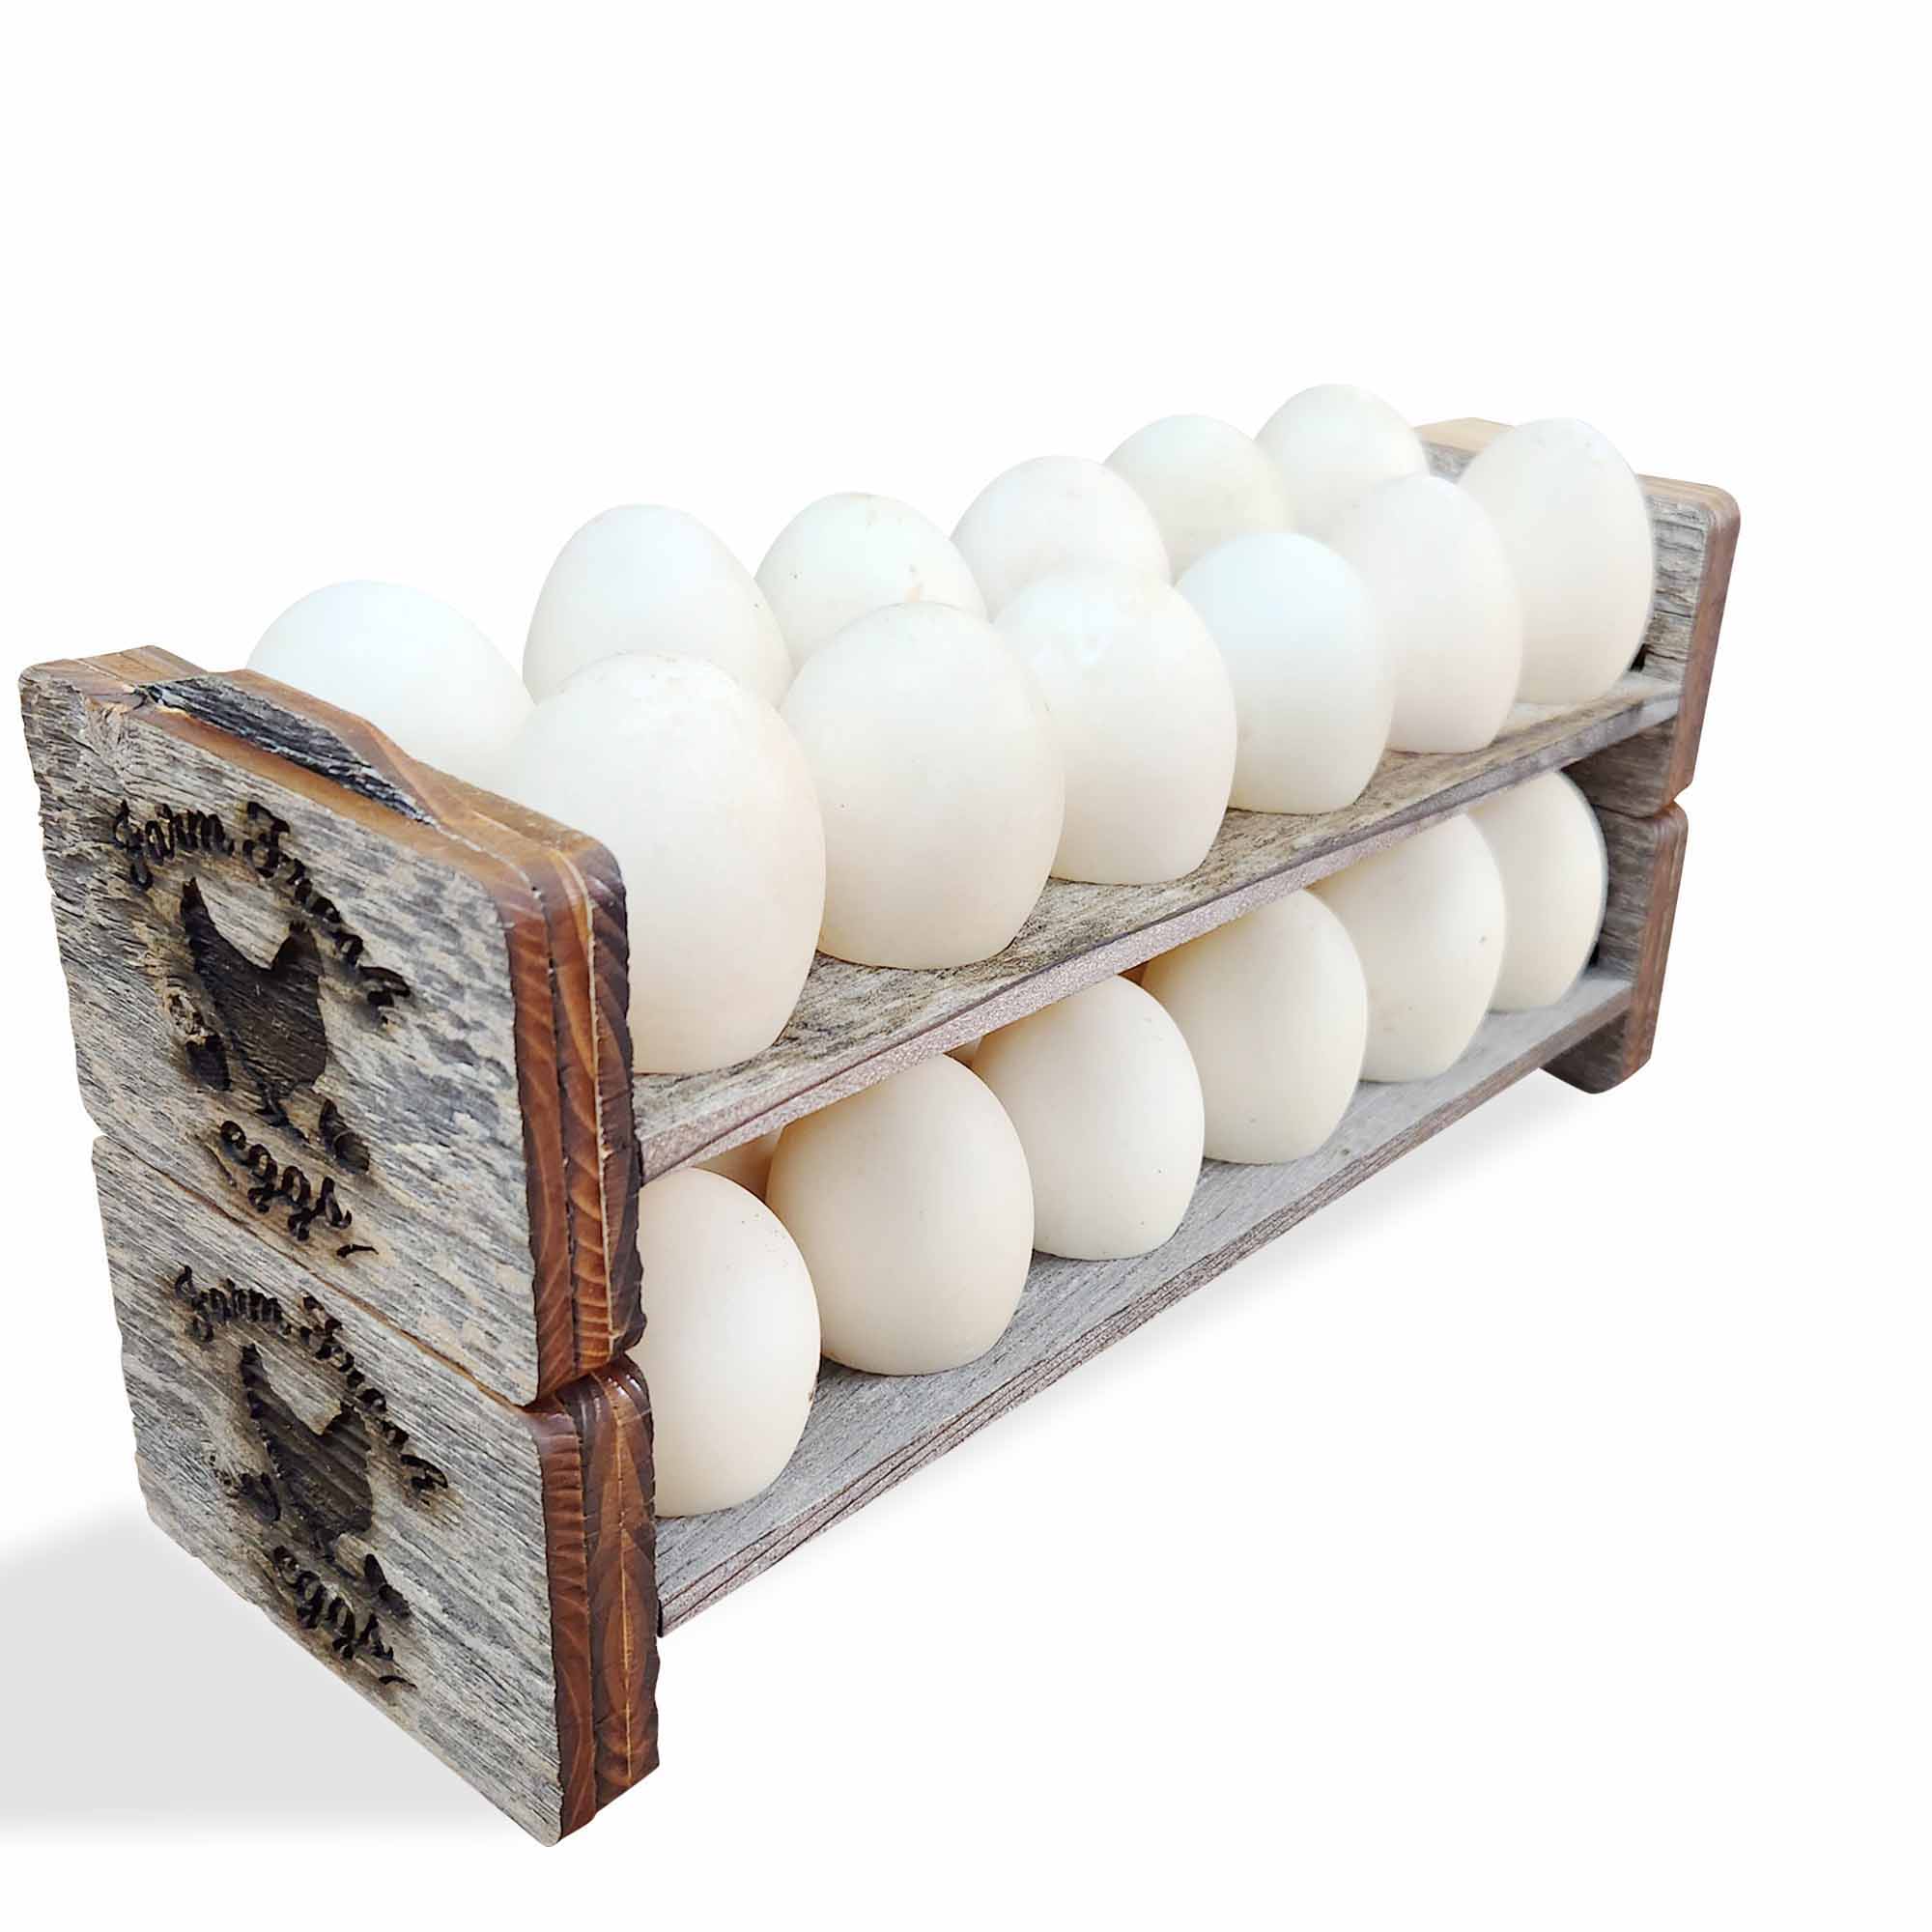 Wooden Egg Holder Countertop Egg Storage Trays Hold Fresh Egg Stackable  Deviled Egg Tray Organizer Rustic Egg Rack Container for Kitchen Counter